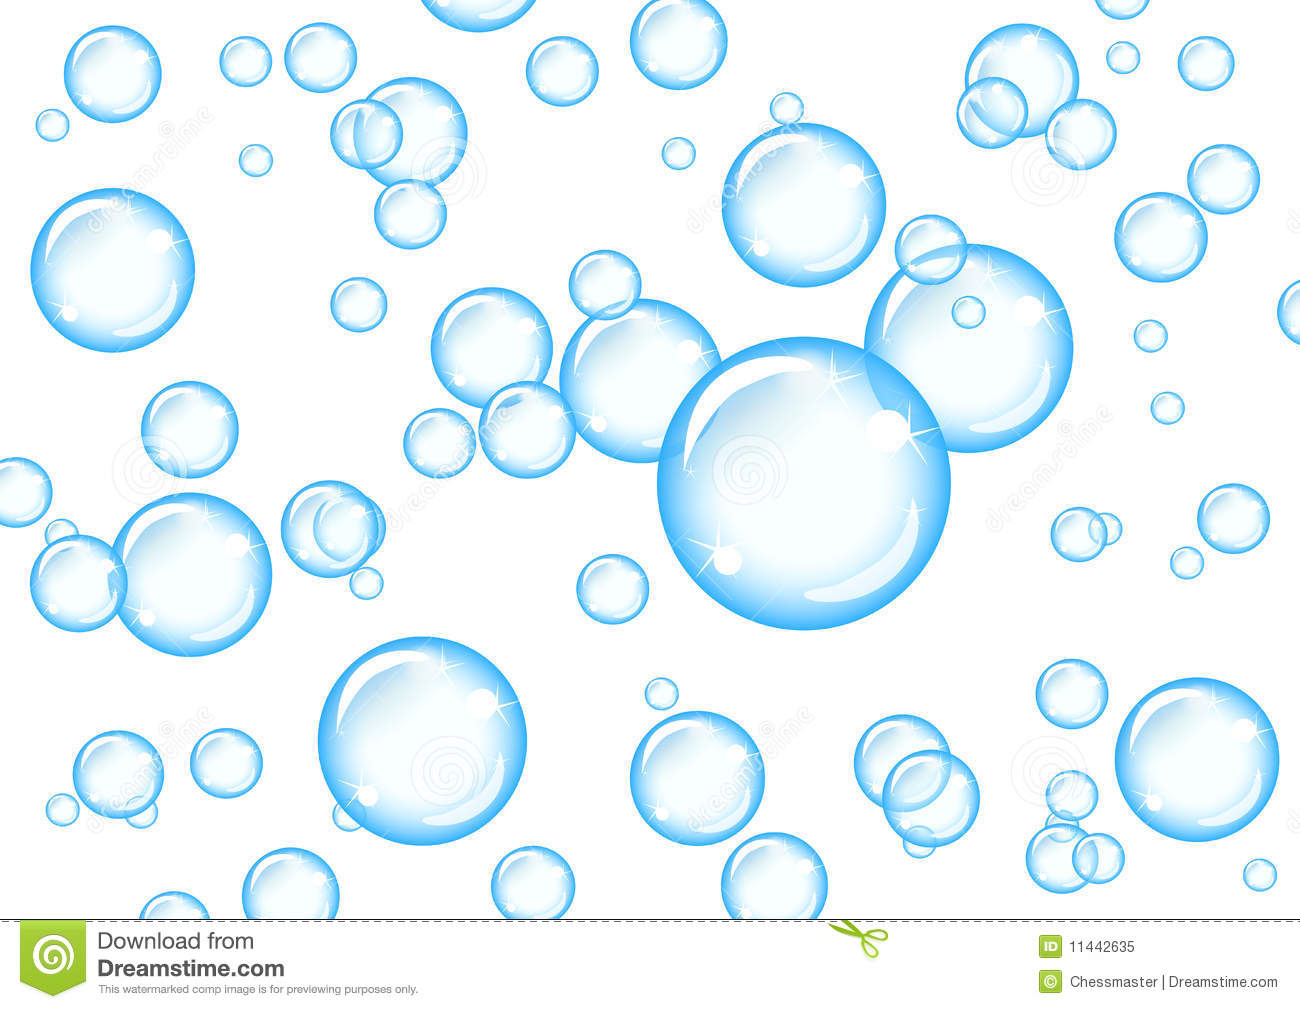 Bubbles and Illustrations on 